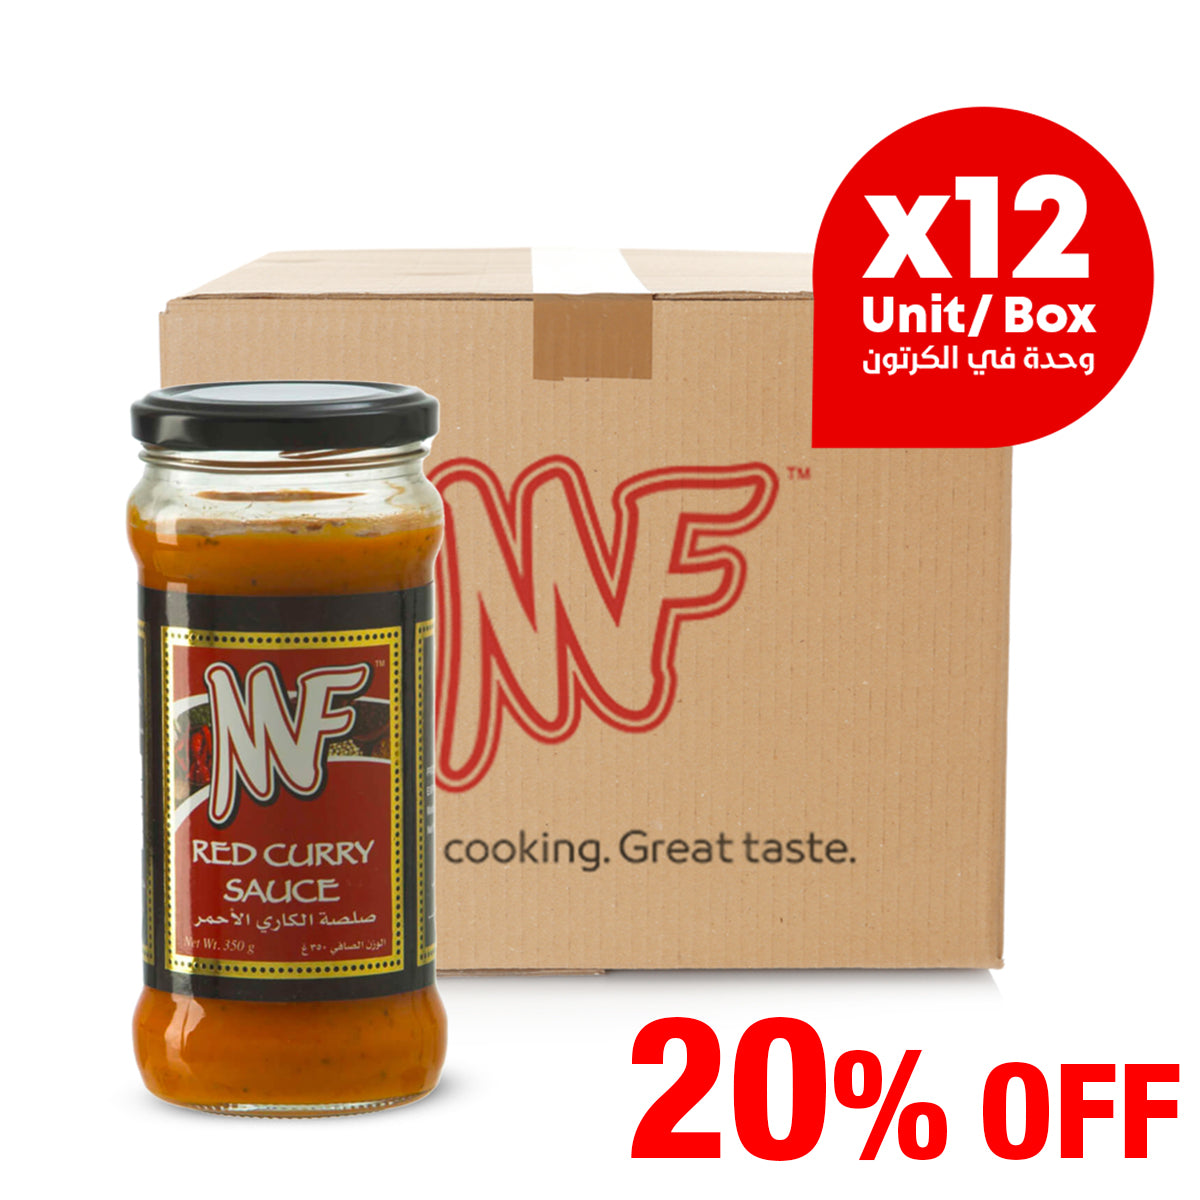 MF Red Curry Sauce 12x350g